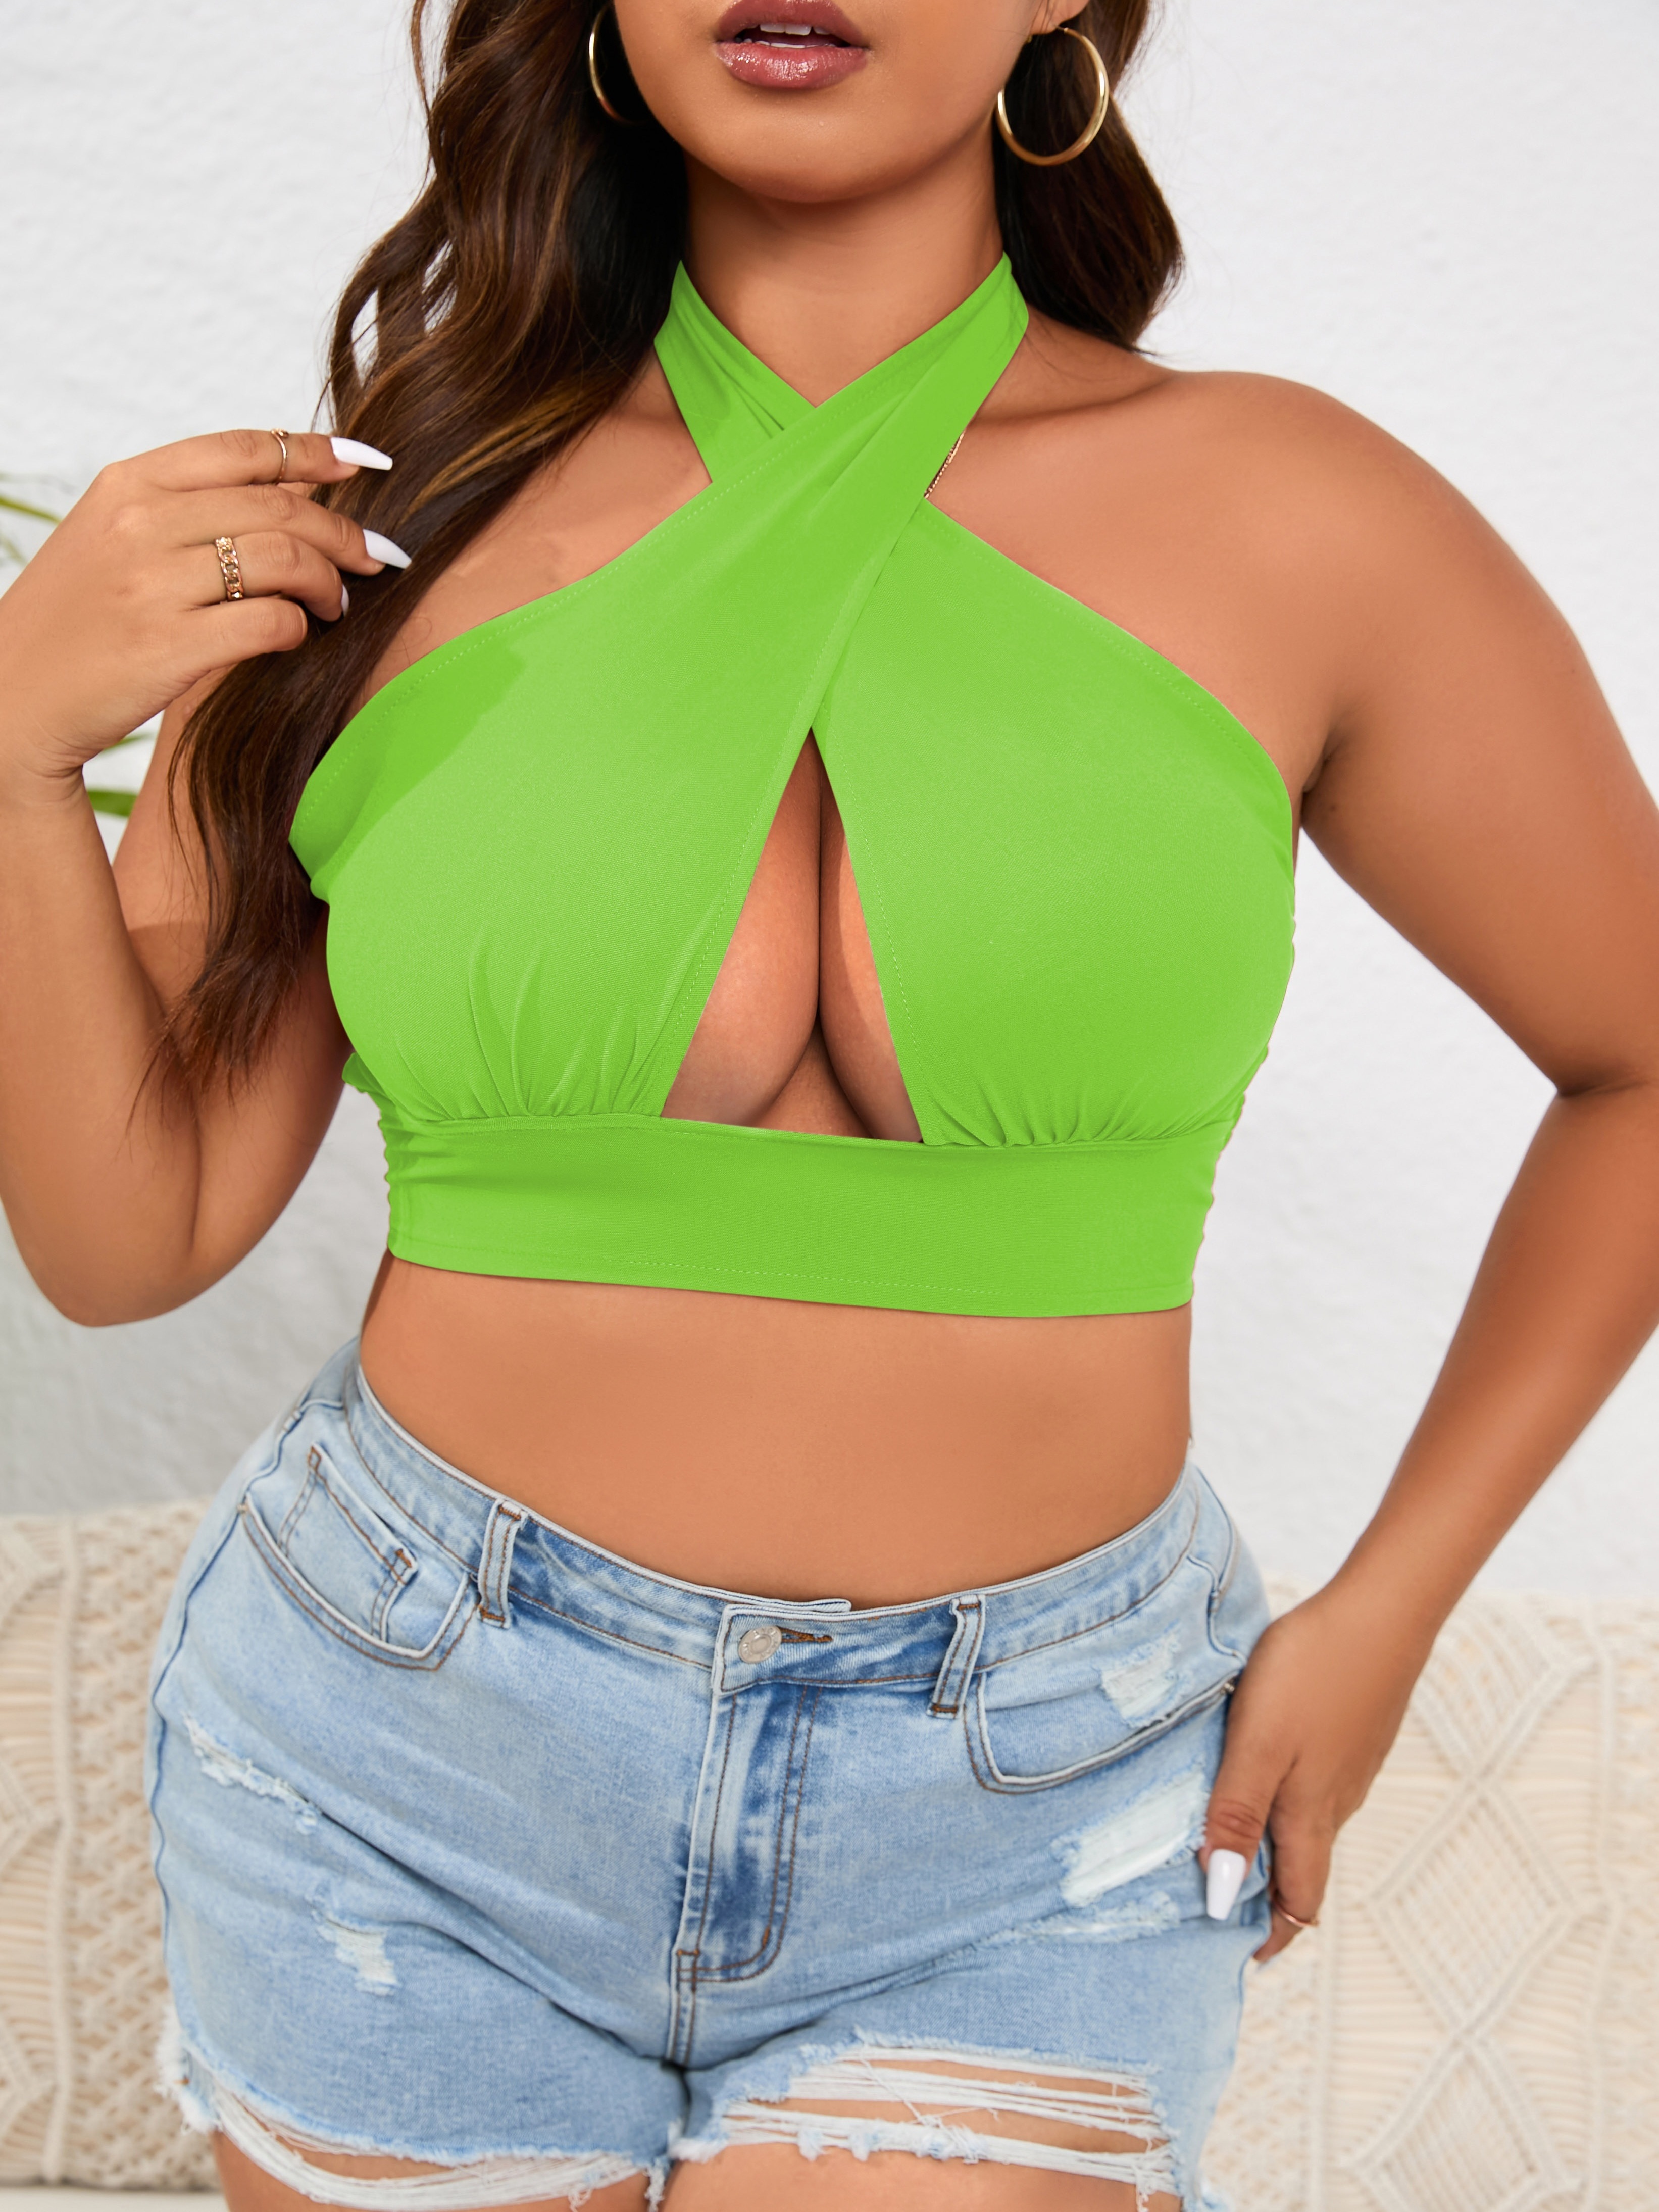 Sexy Tight Vest Women Summer Backless Cross Tie Tank Tops Solid